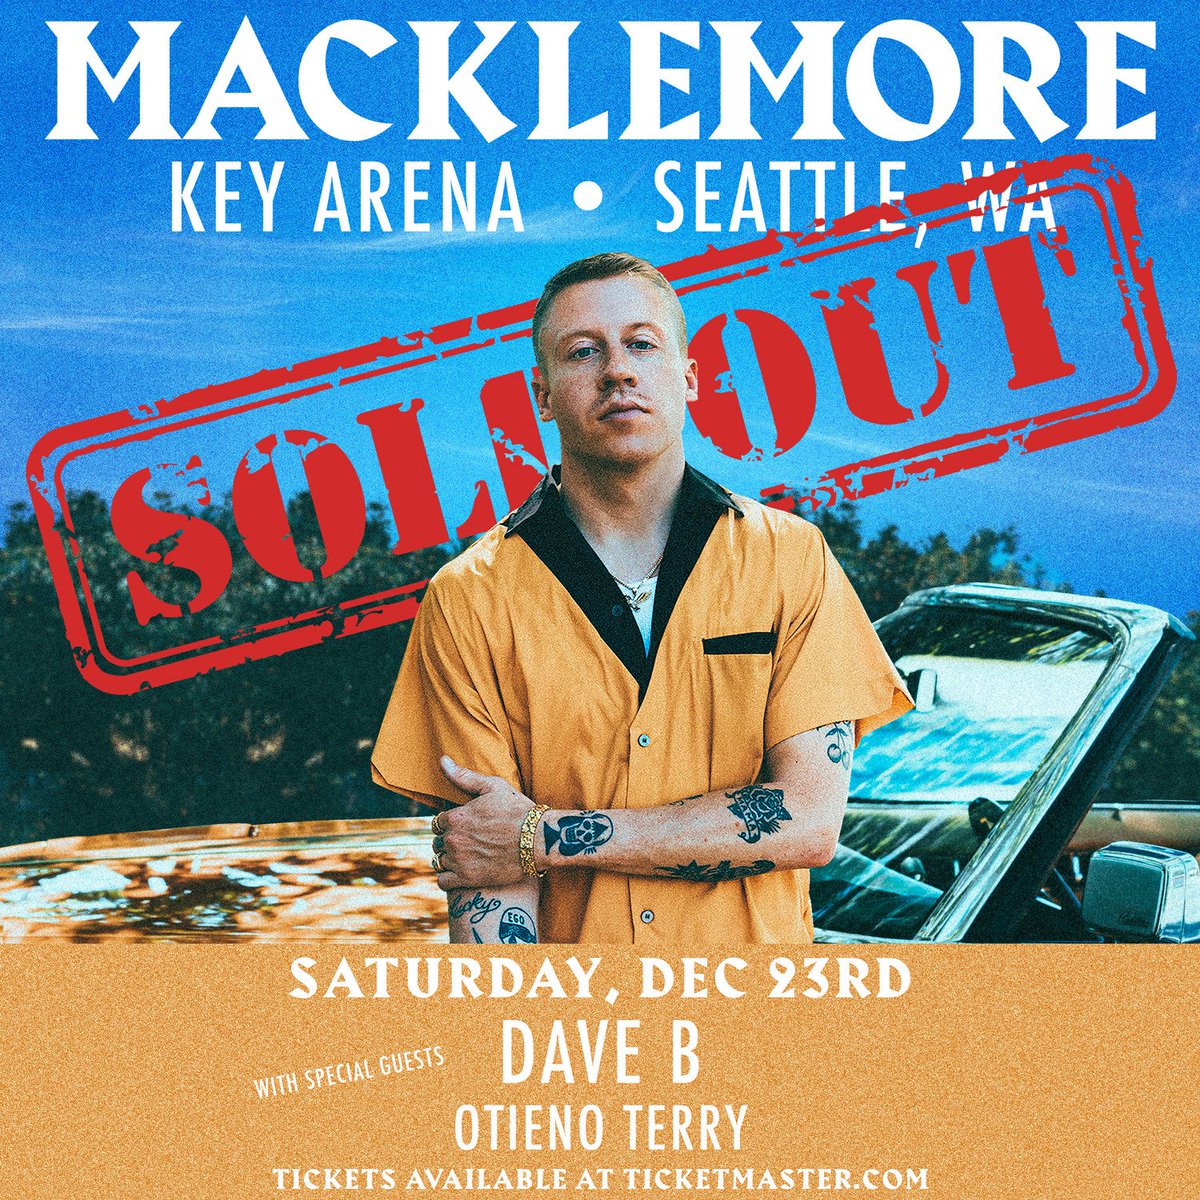 BACK TO BACK.  SOLD OUT.  Thank you Seattle.  Cannot wait... https://t.co/4vYa8n6WQn